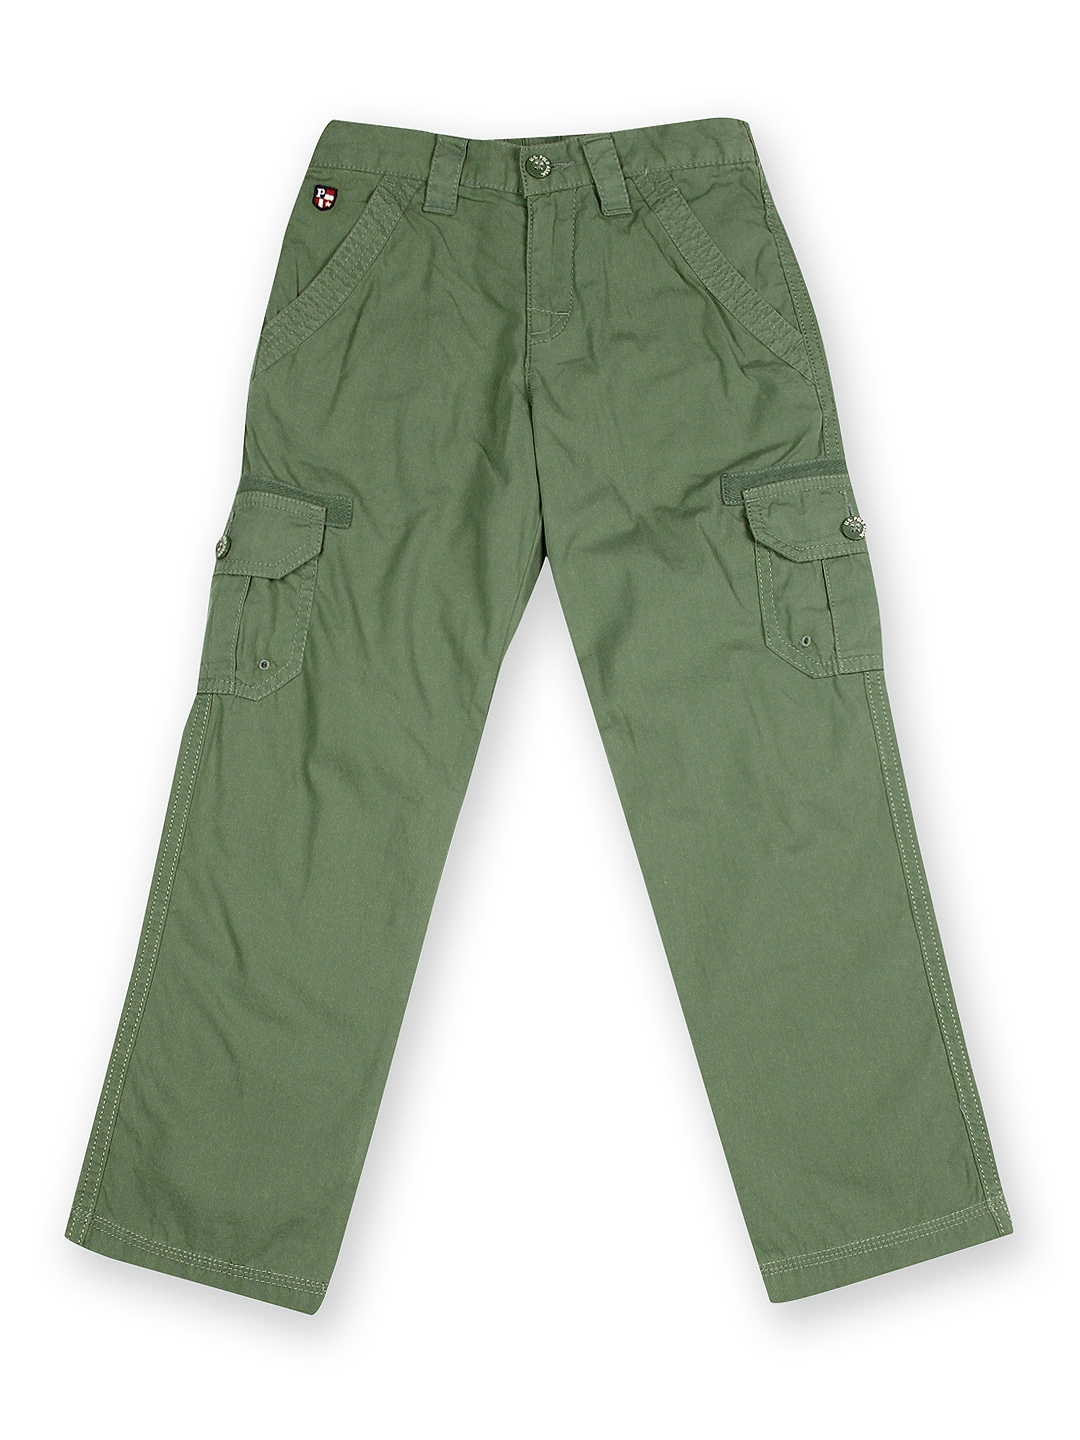 Buy US POLO ASSN Olive Boys 6 Pocket Solid Cargo Pants  Shoppers Stop